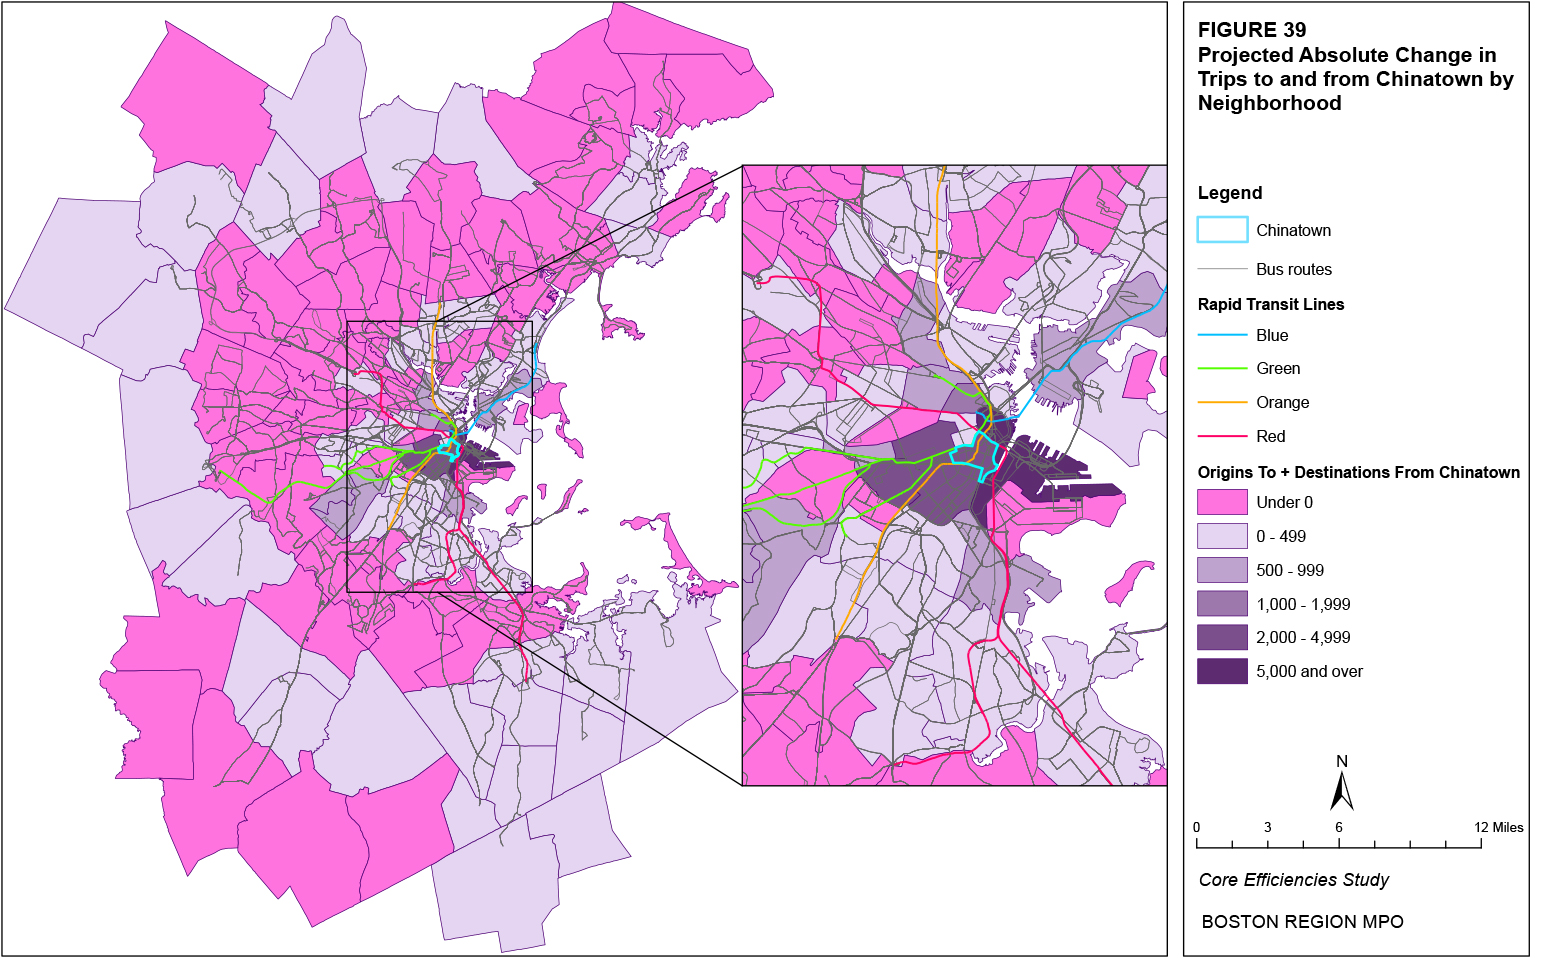 This map shows the projected absolute change in trips to and from the Chinatown neighborhood by neighborhood.